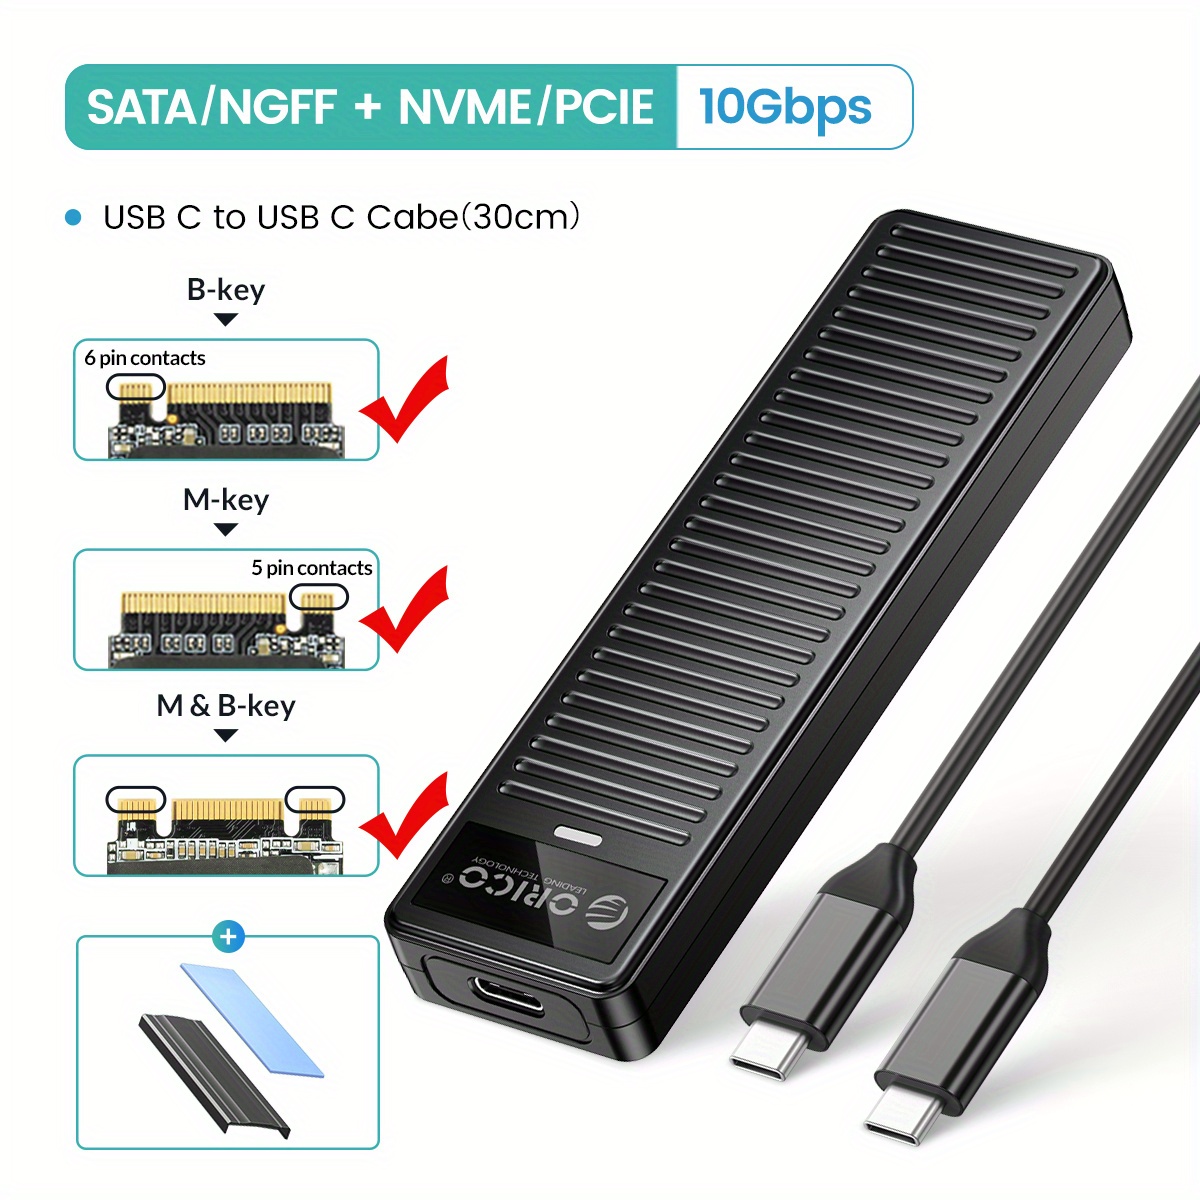 M.2 NVME SSD Enclosure Adapter Tool-Free, USB C 3.1 Gen 2 10Gbps